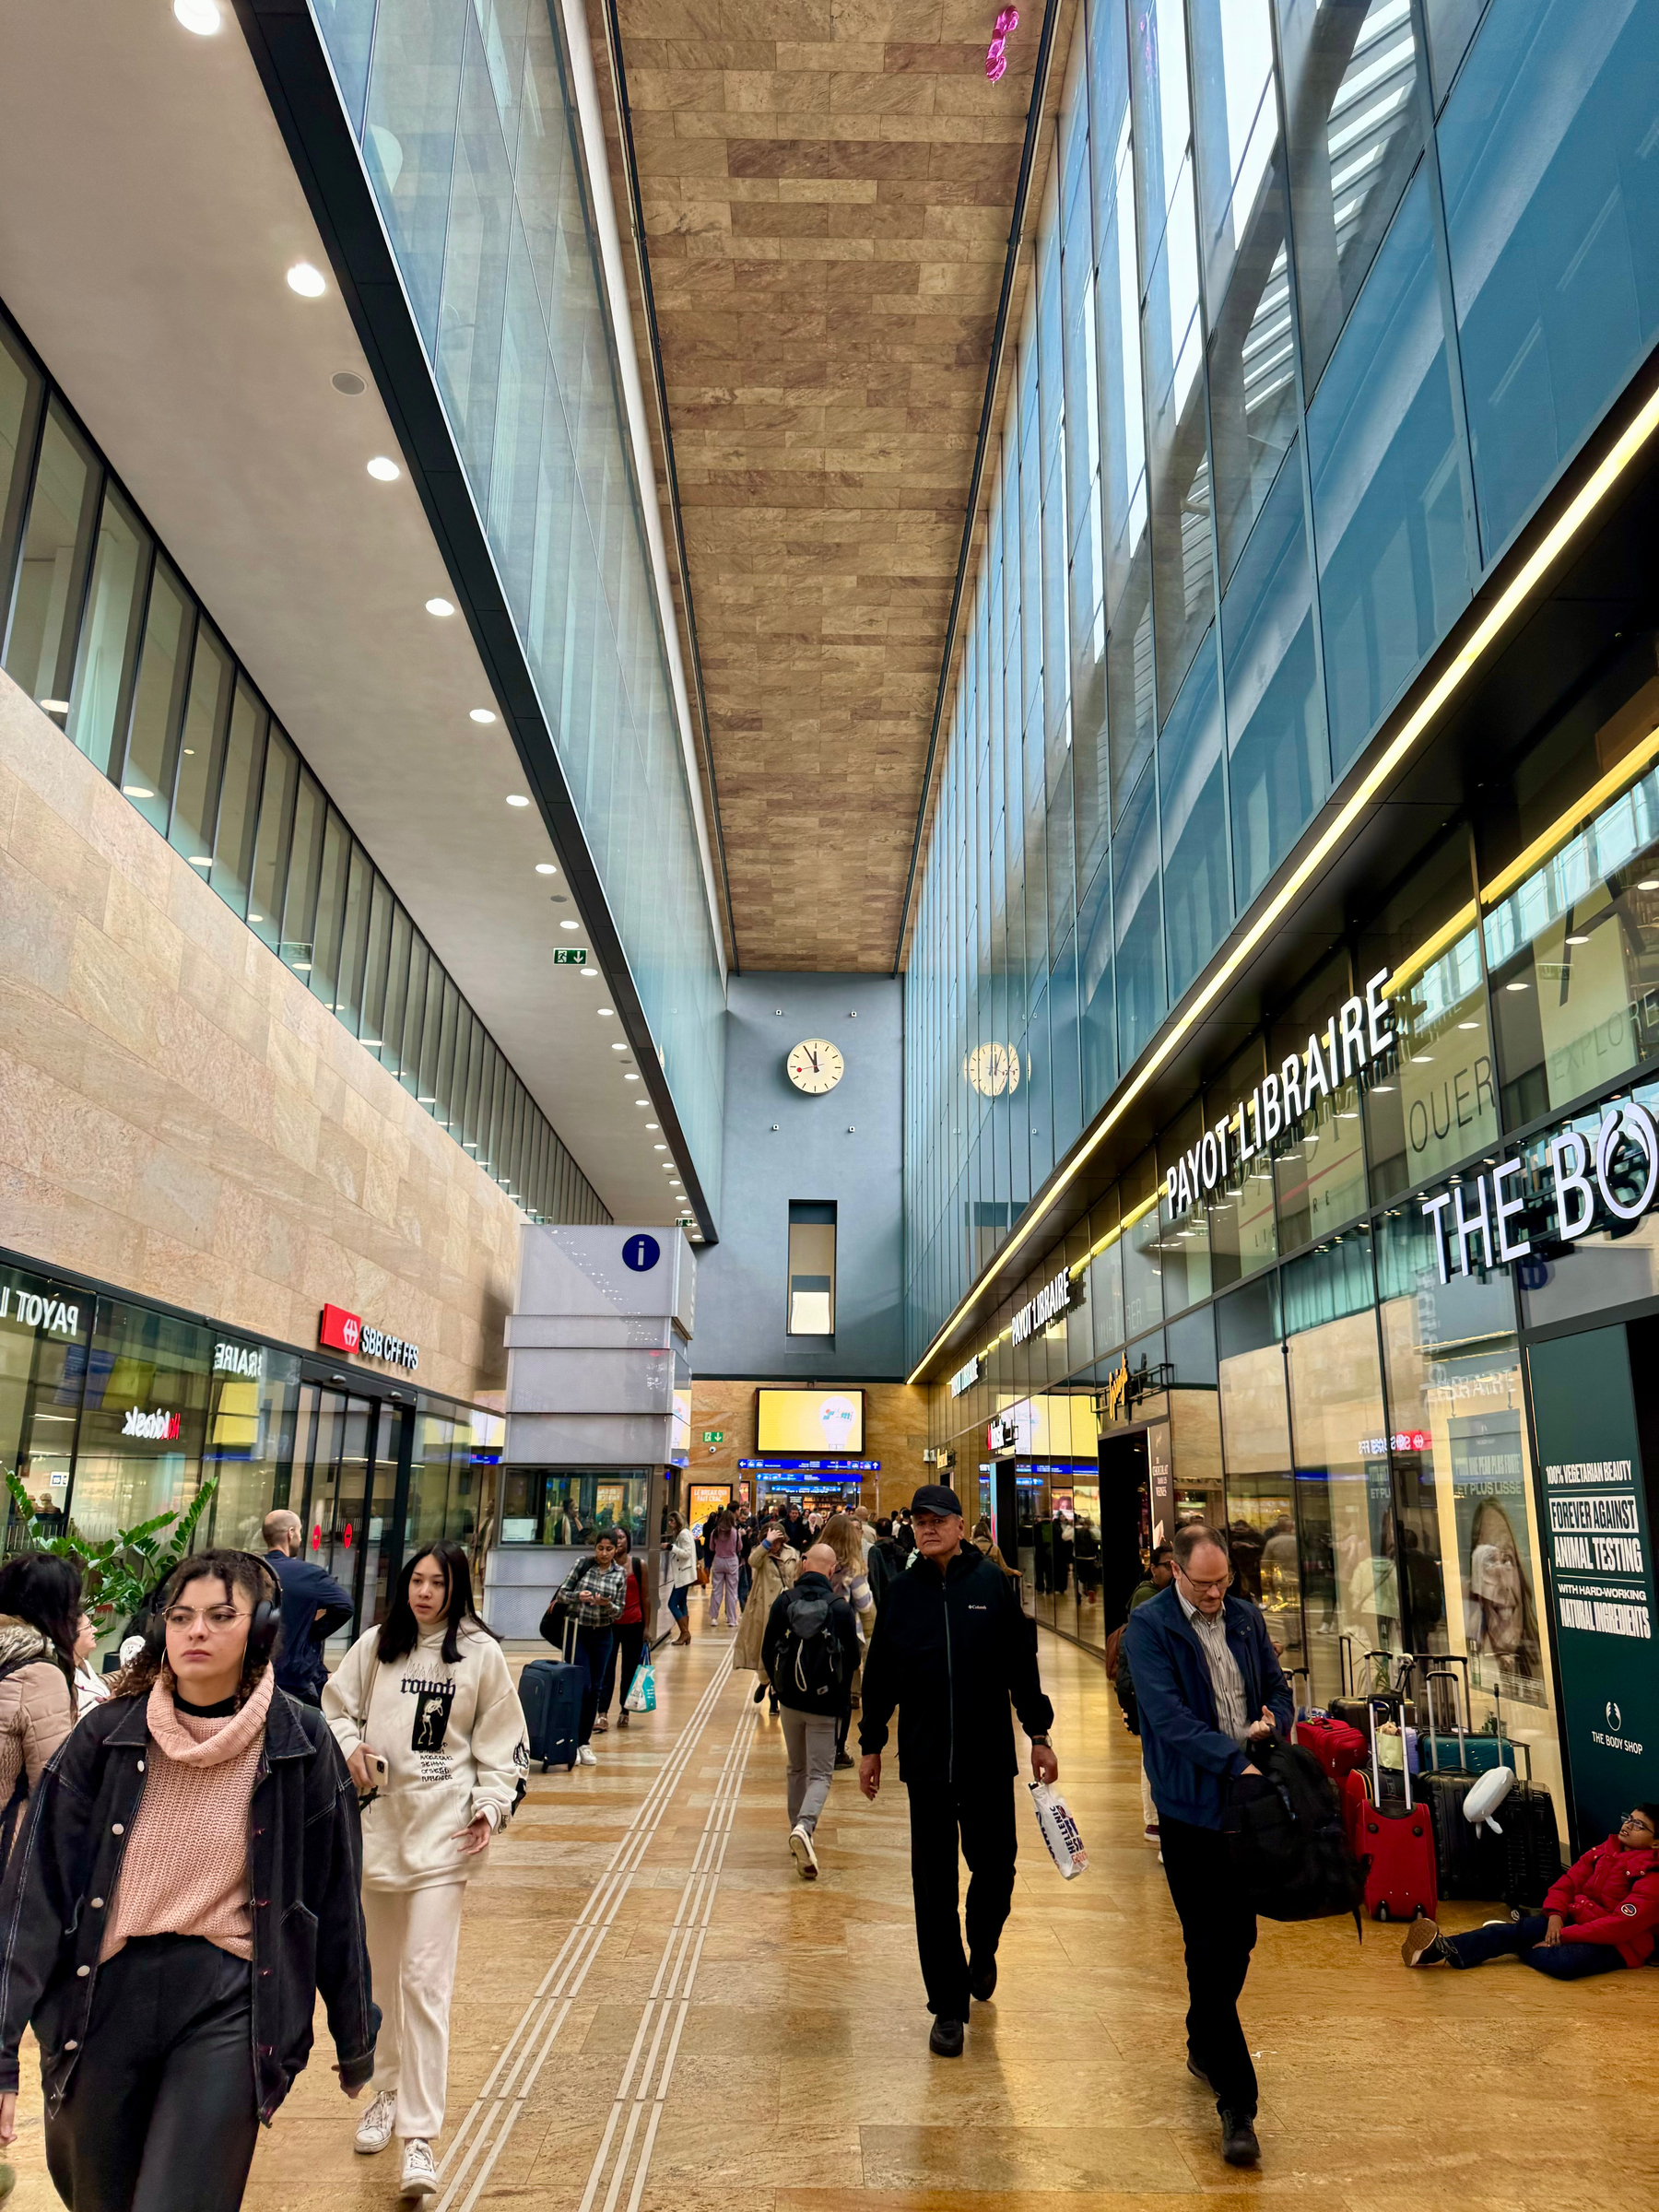 Indoor corridor in a modern building with people walking, shops on the right, decorative wood paneling on the ceiling, glass facade on the left, and hanging clocks.